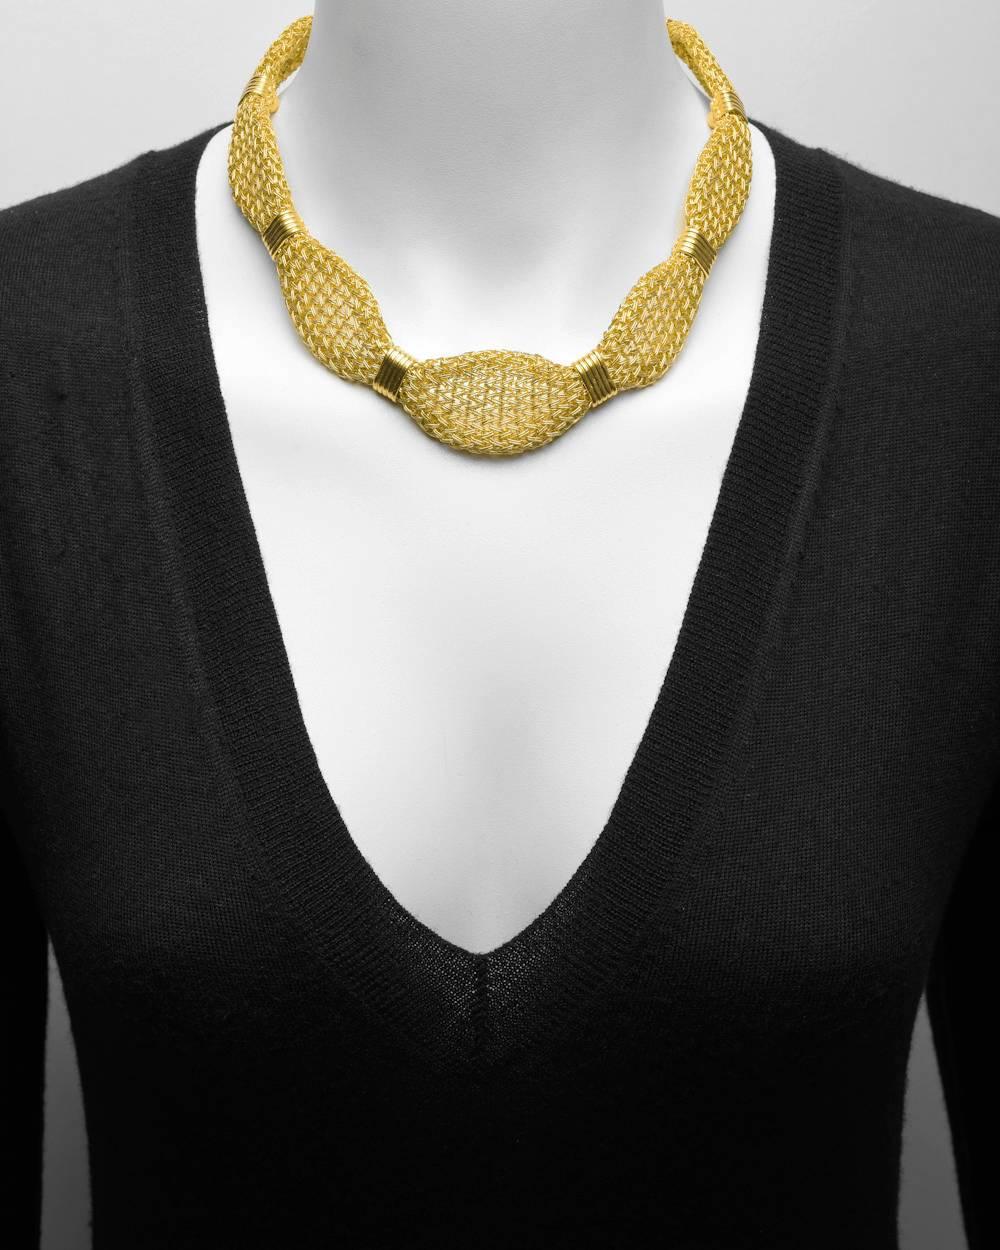 Woven gold necklace, pinched in at intervals with ribbed polished gold connectors and secured by a box clasp, in 24k yellow gold. 18.5" long and 238 grams.
